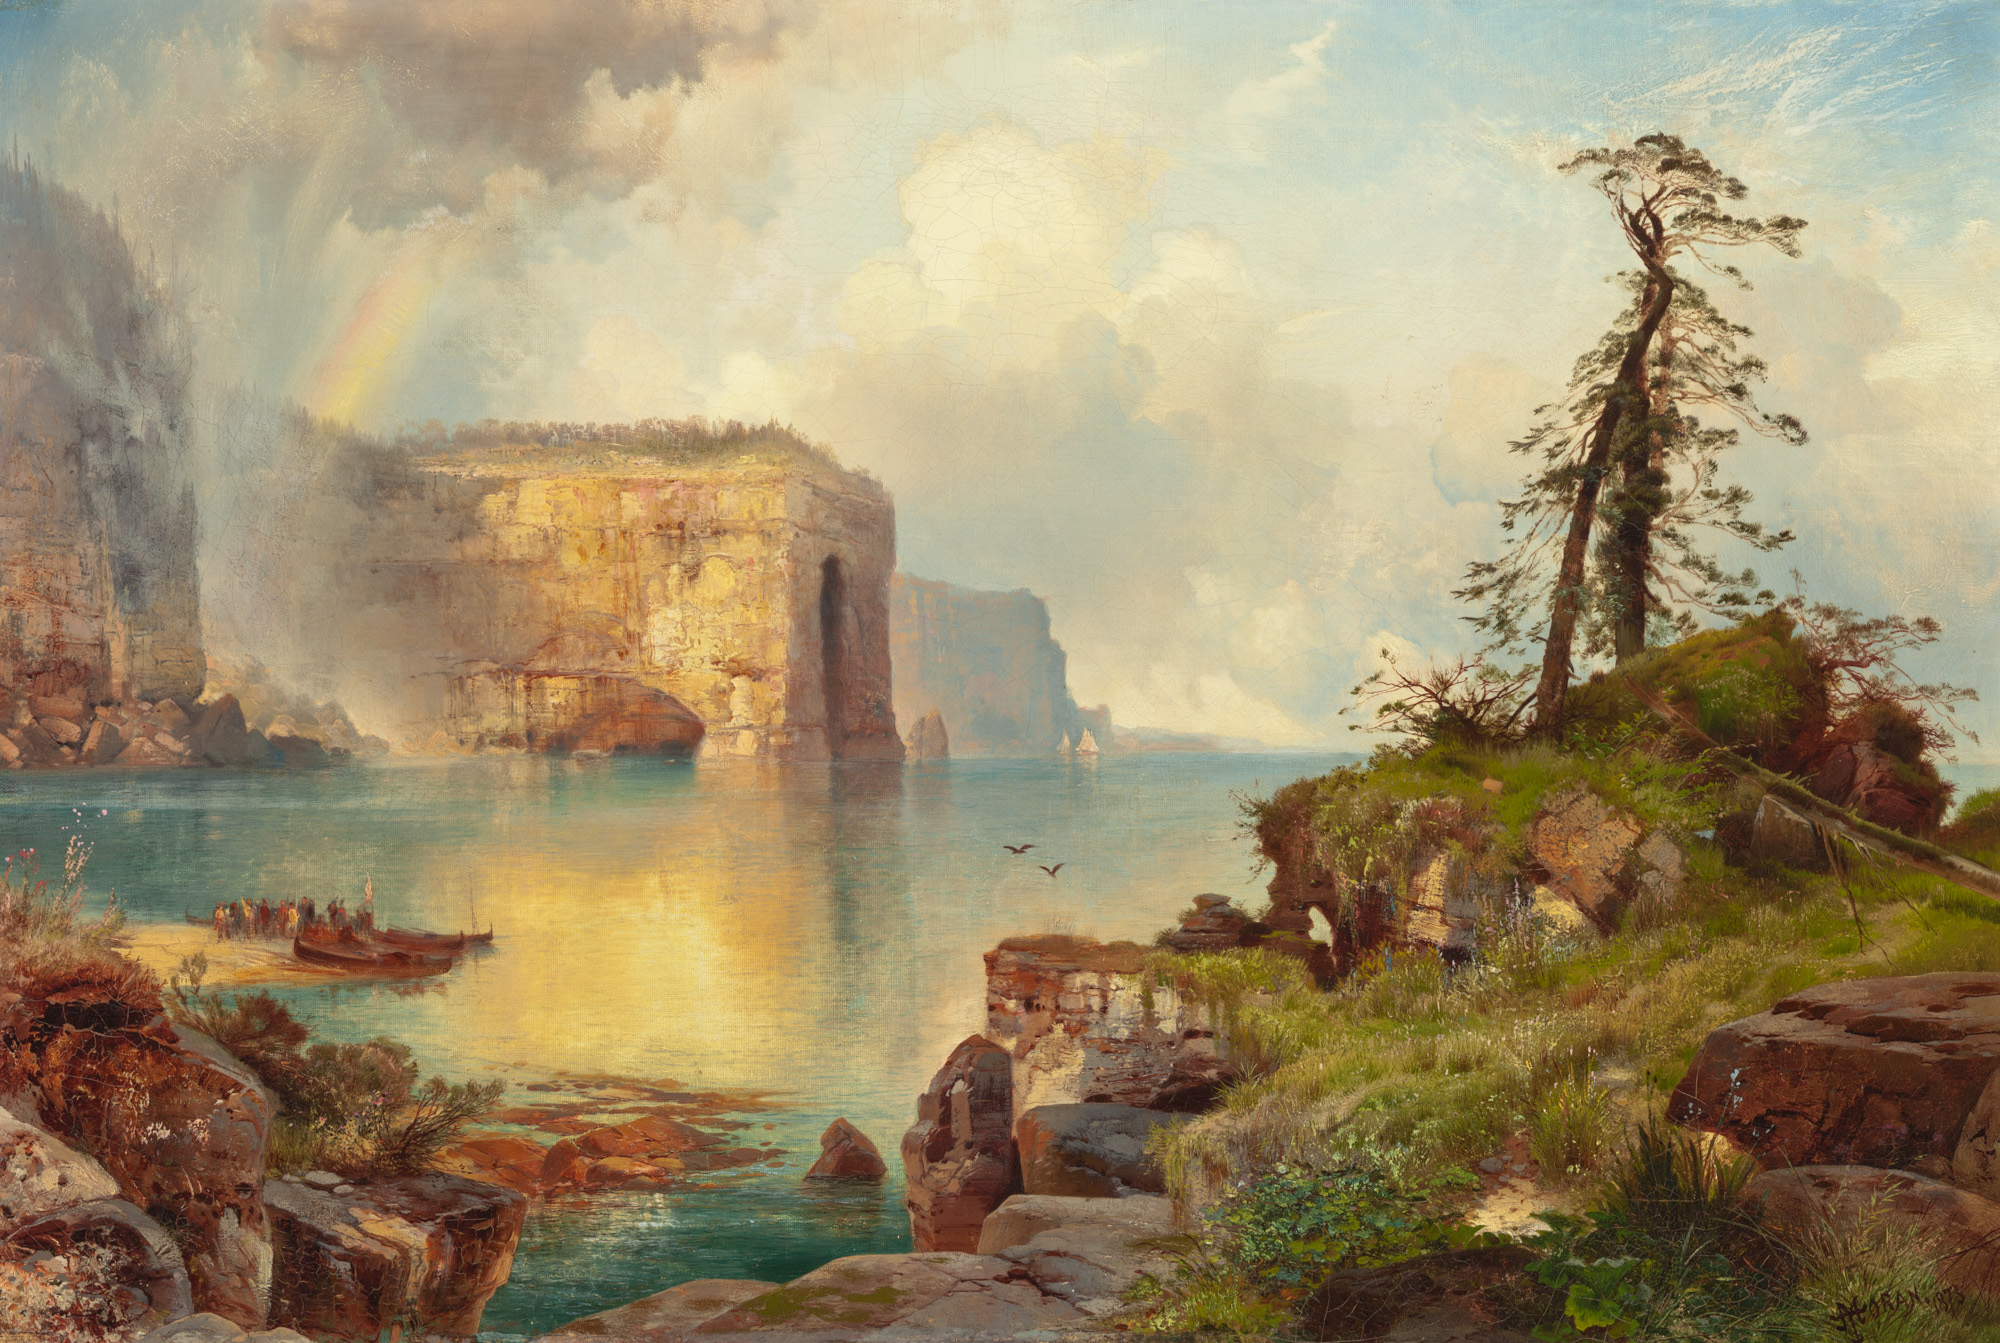 This image depicts a romantic scene featuring a grouping of rocks in the foreground covered with moss, flowers and trees. In the middle ground you see a group of people docked on the sandy beach peering out to a large coastal rock formation resembling an archway. There is a rainbow in the sky as birds are flying.